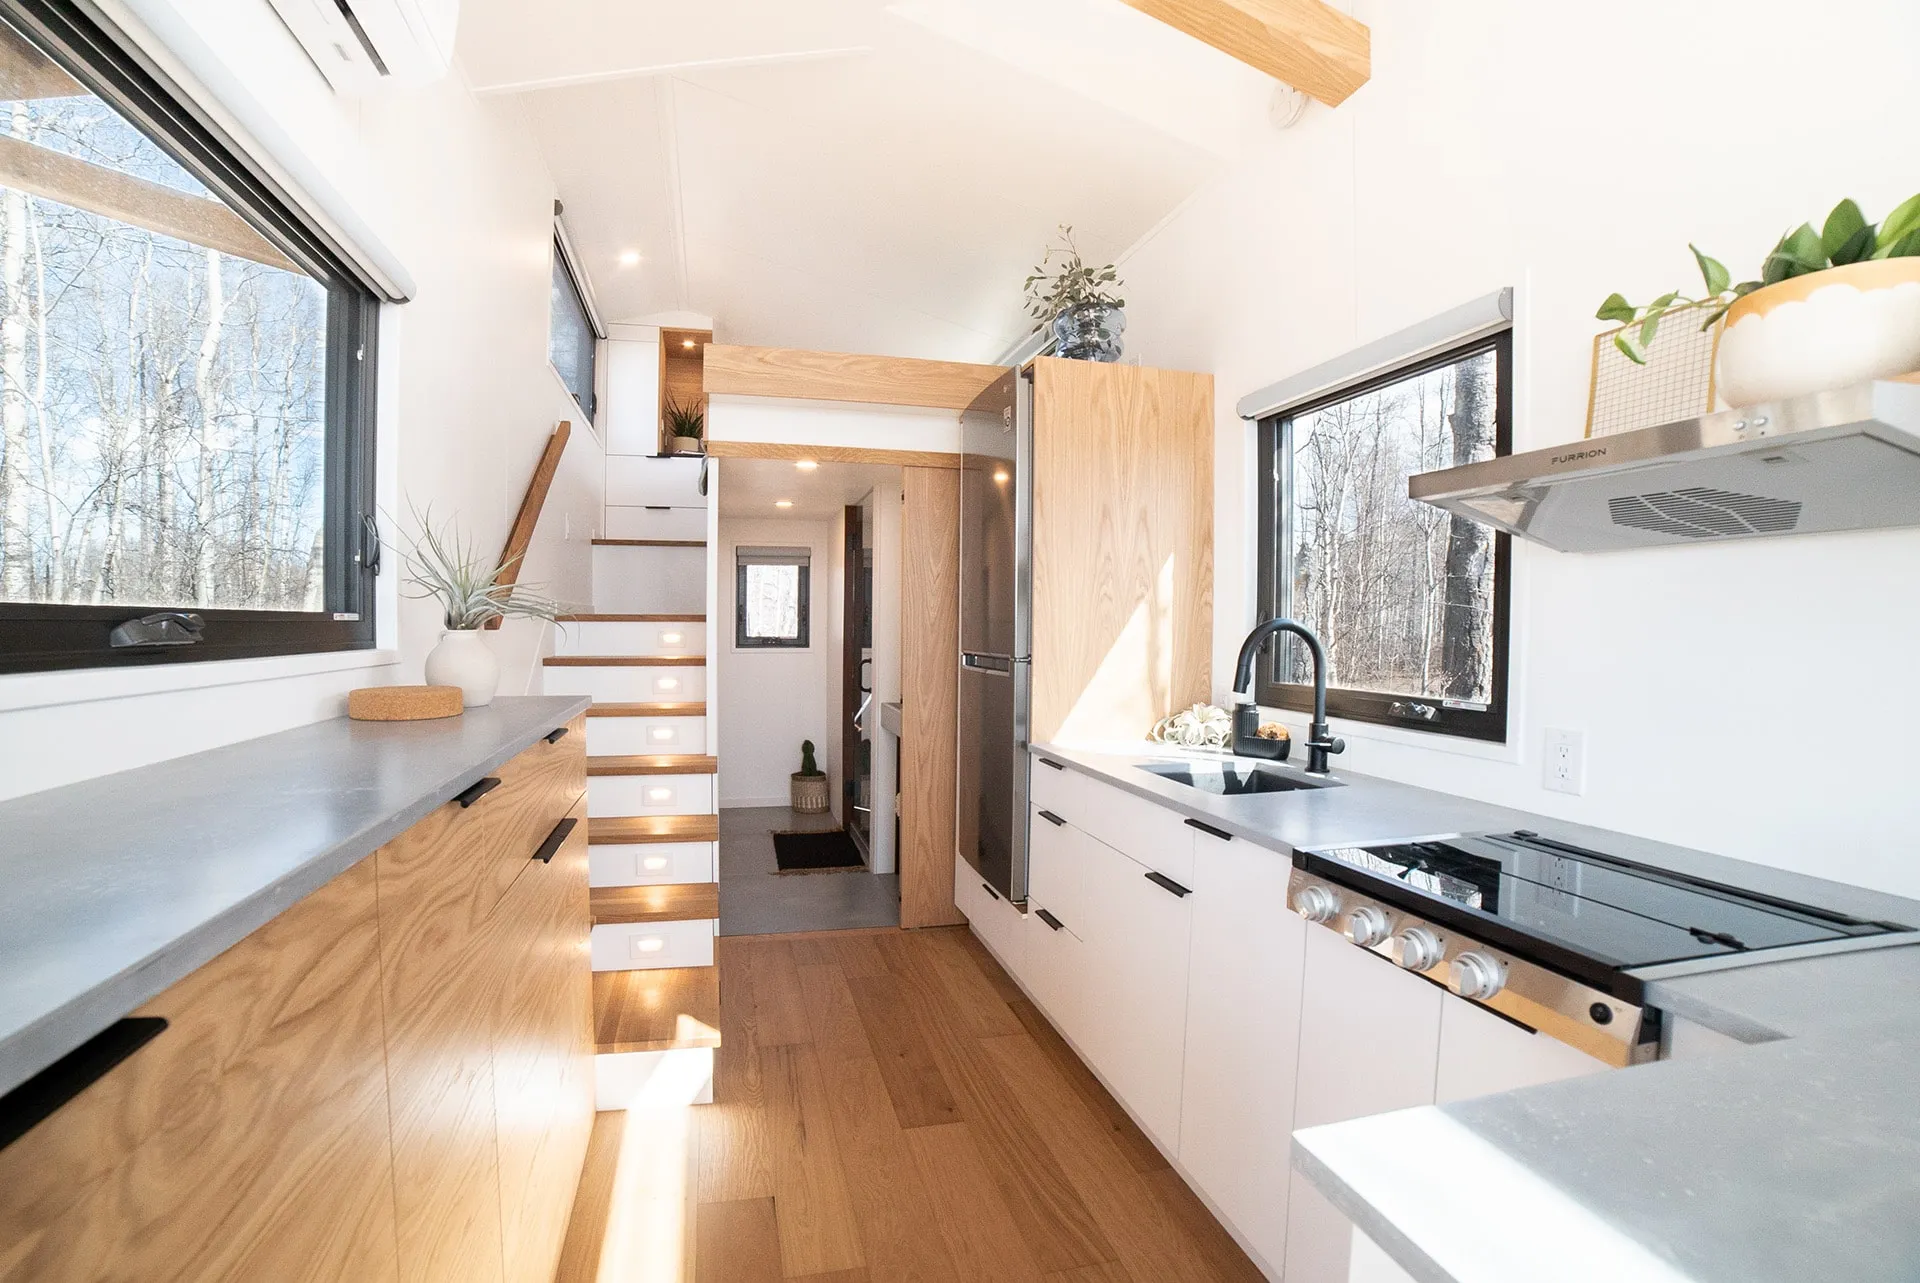 aqua tiny homes interior angled view of main floor with wider view of modern kitchen in a small space 